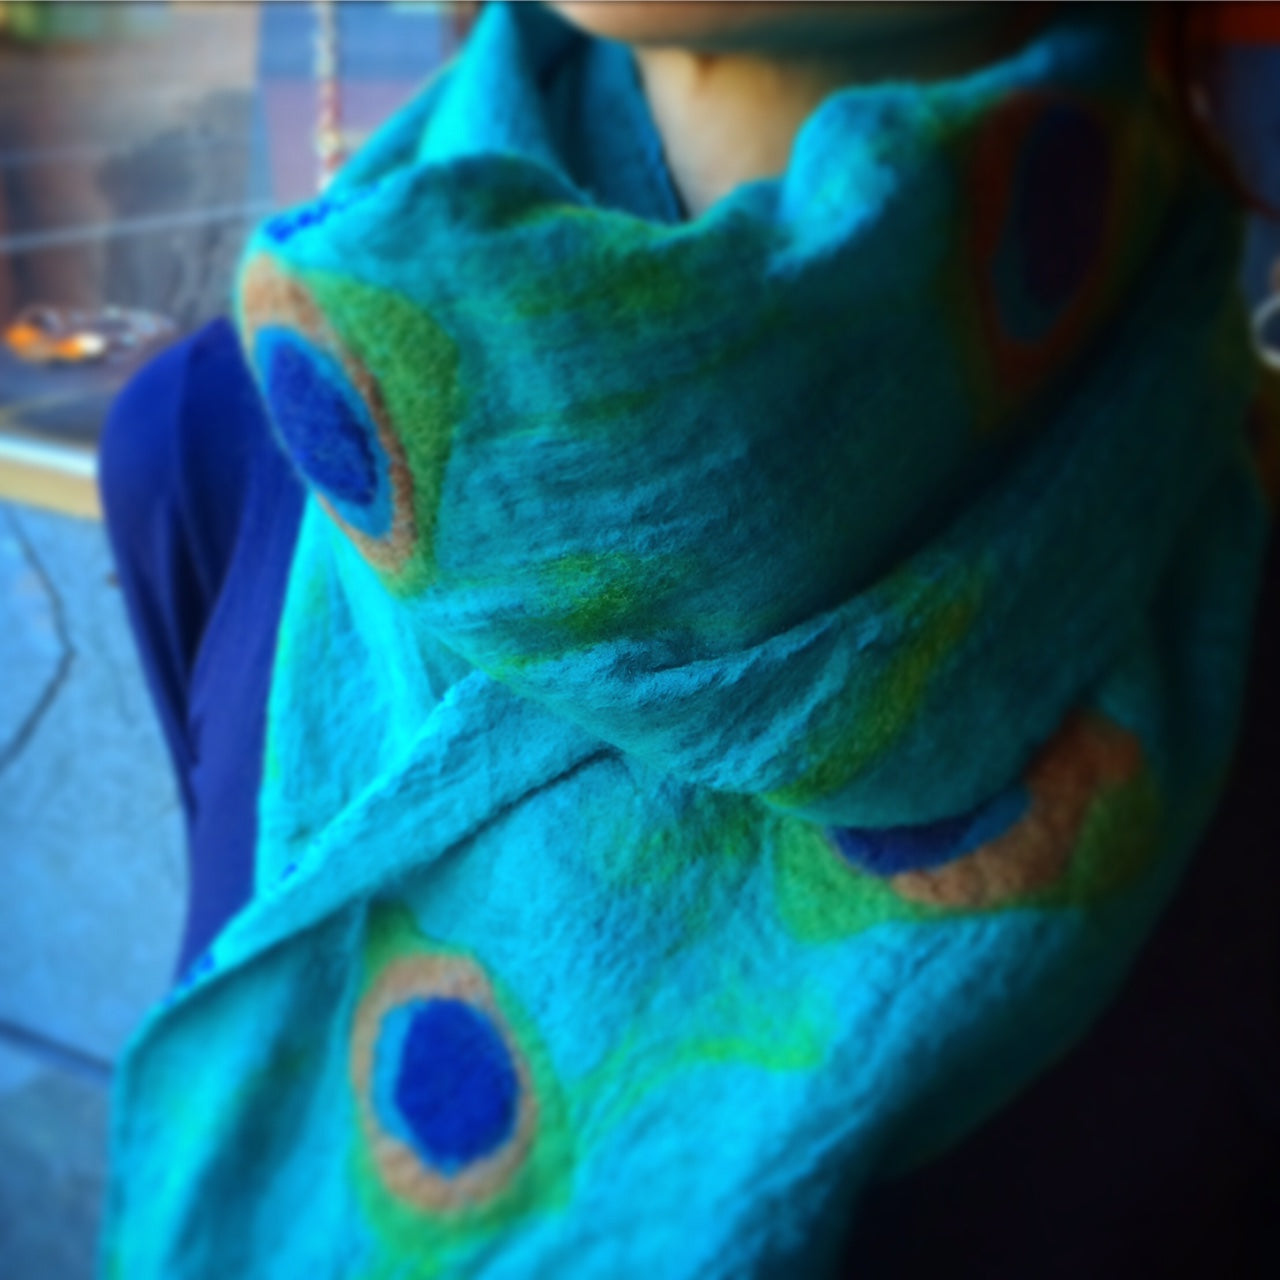 Turquoise Peacock Scarf - The Nancy Smillie Shop - Art, Jewellery & Designer Gifts Glasgow